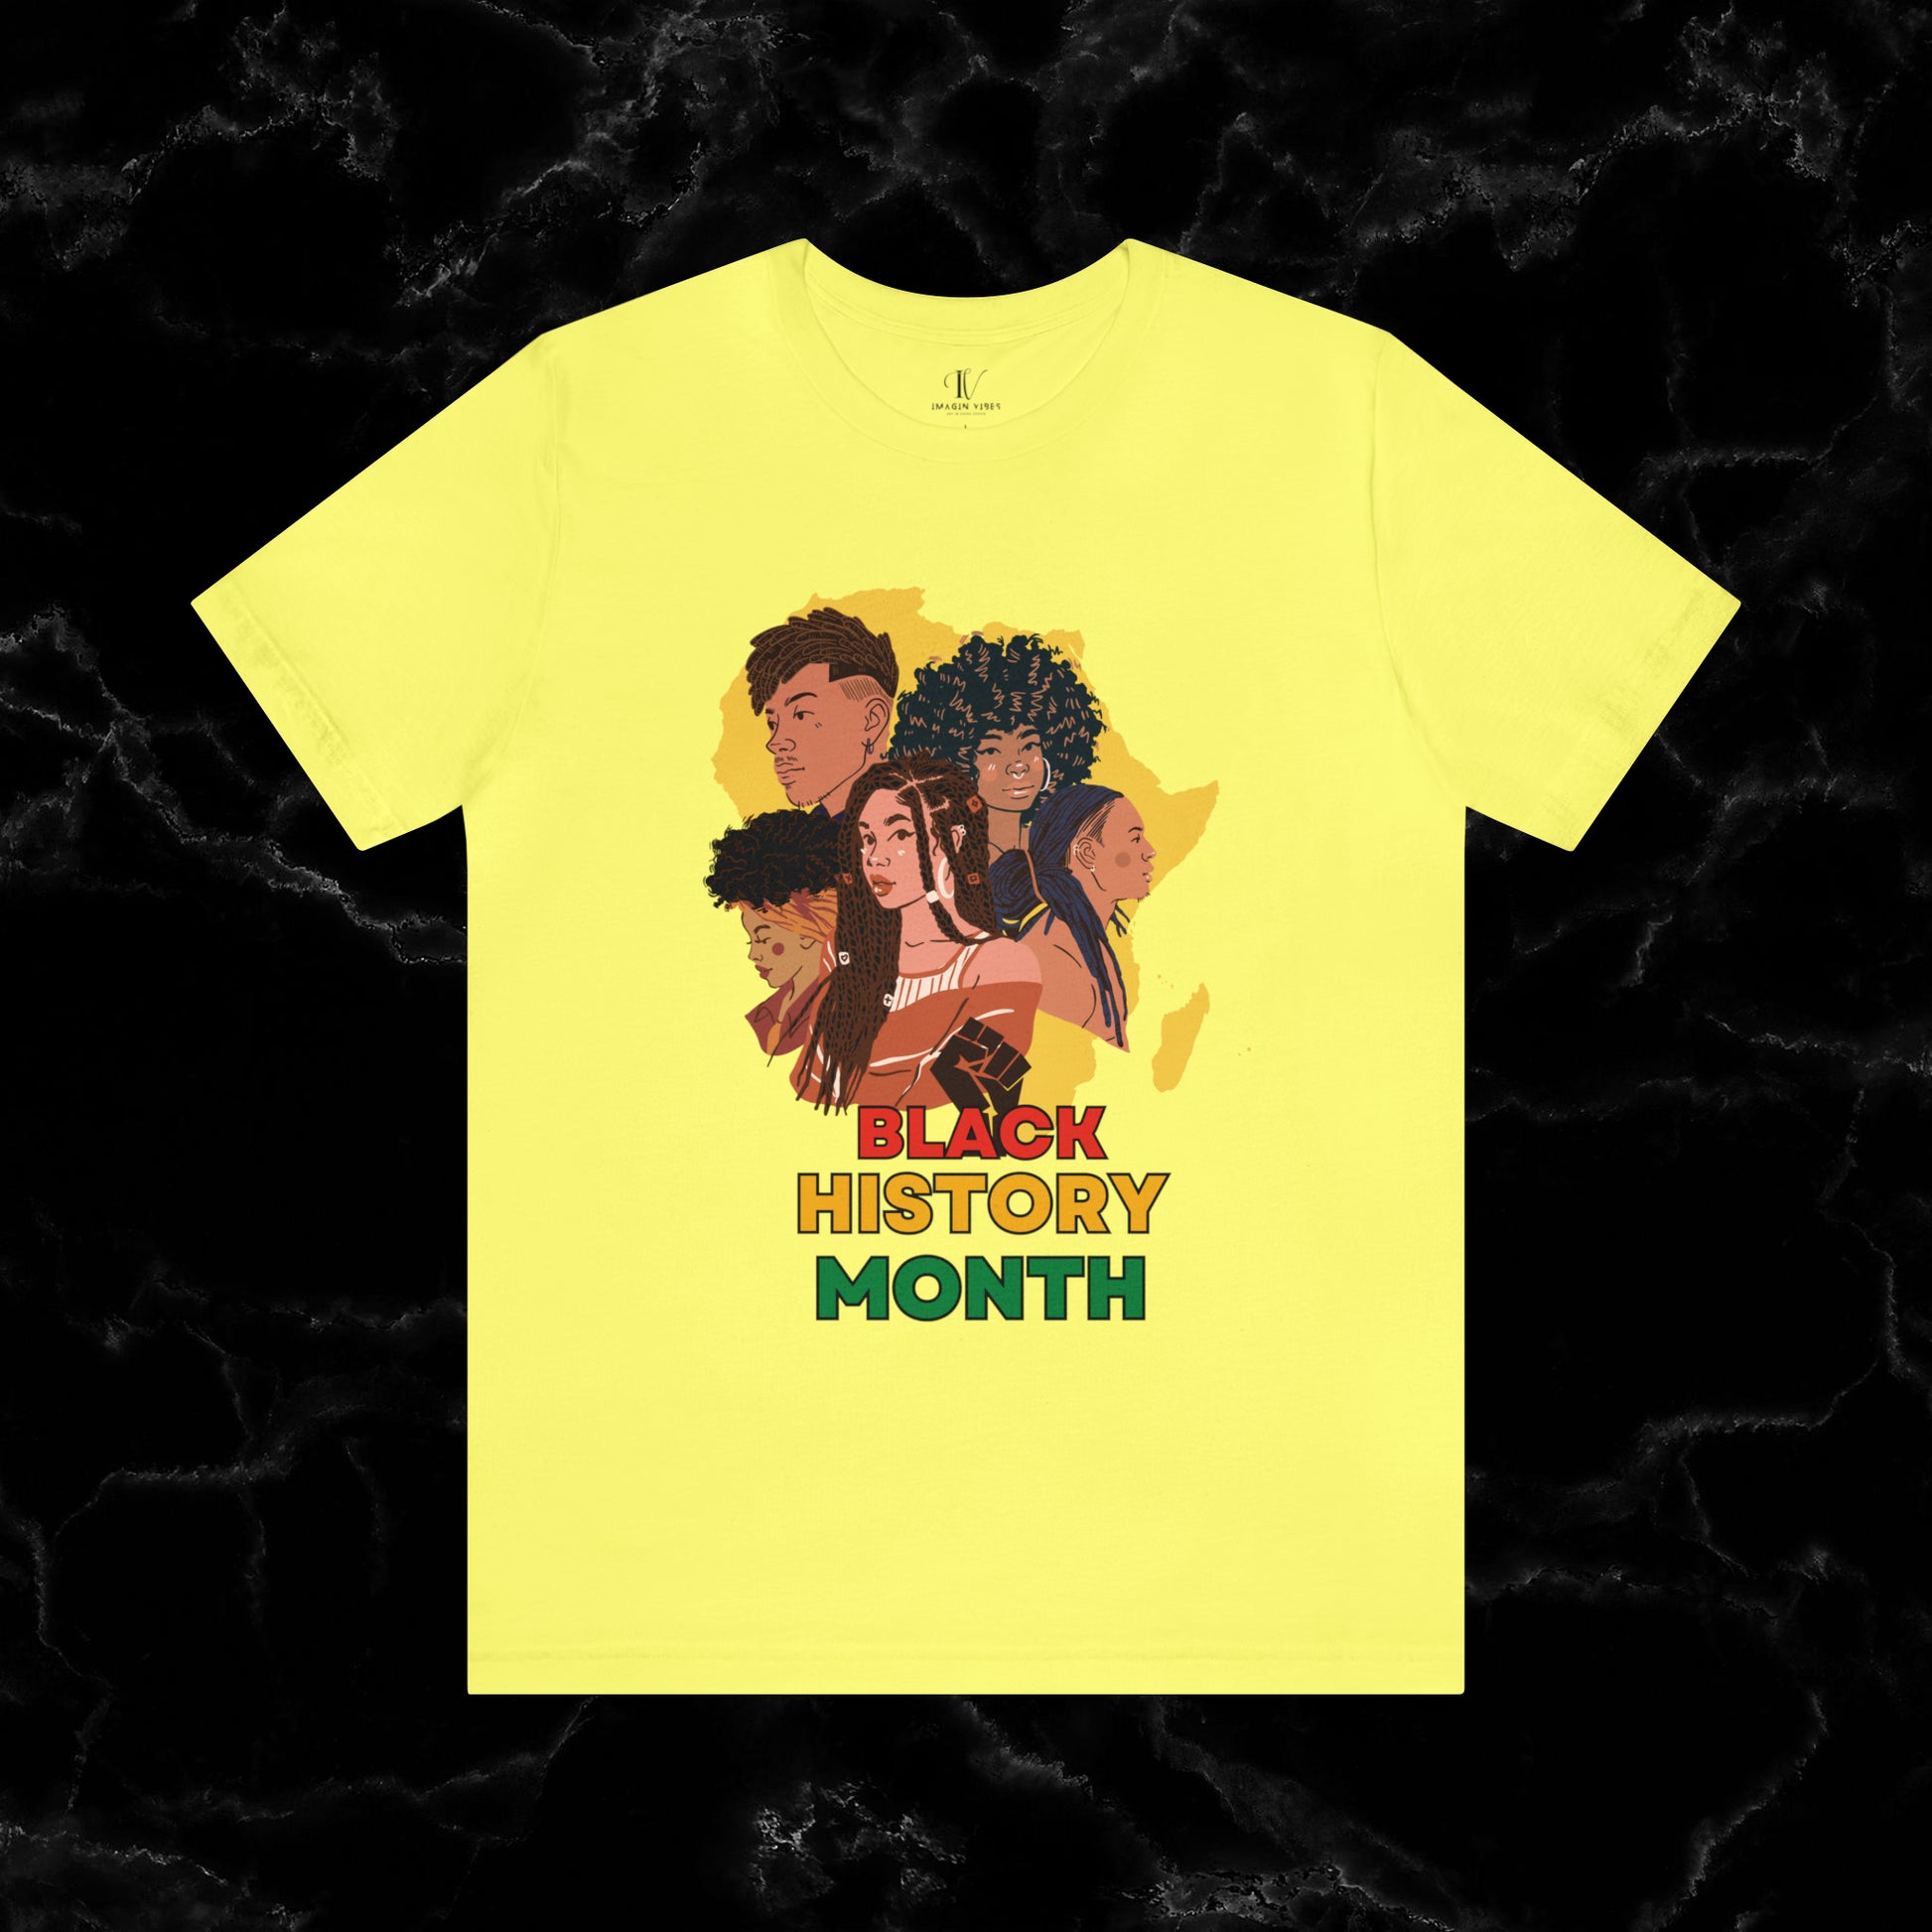 Trendy Black History Month Shirts - Celebrating African American Pride and Heritage T-Shirt Yellow XS 